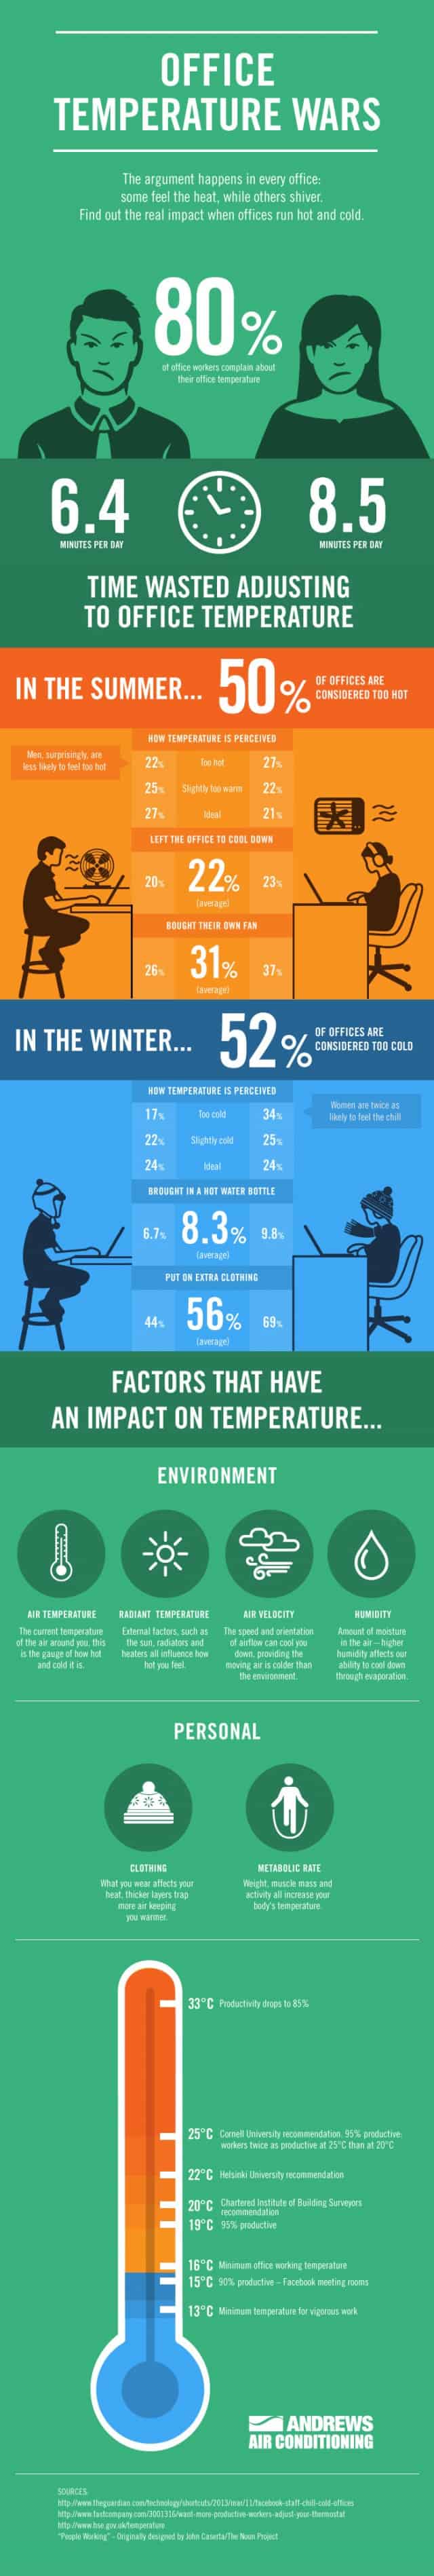 Office Temperature Wars Infographic